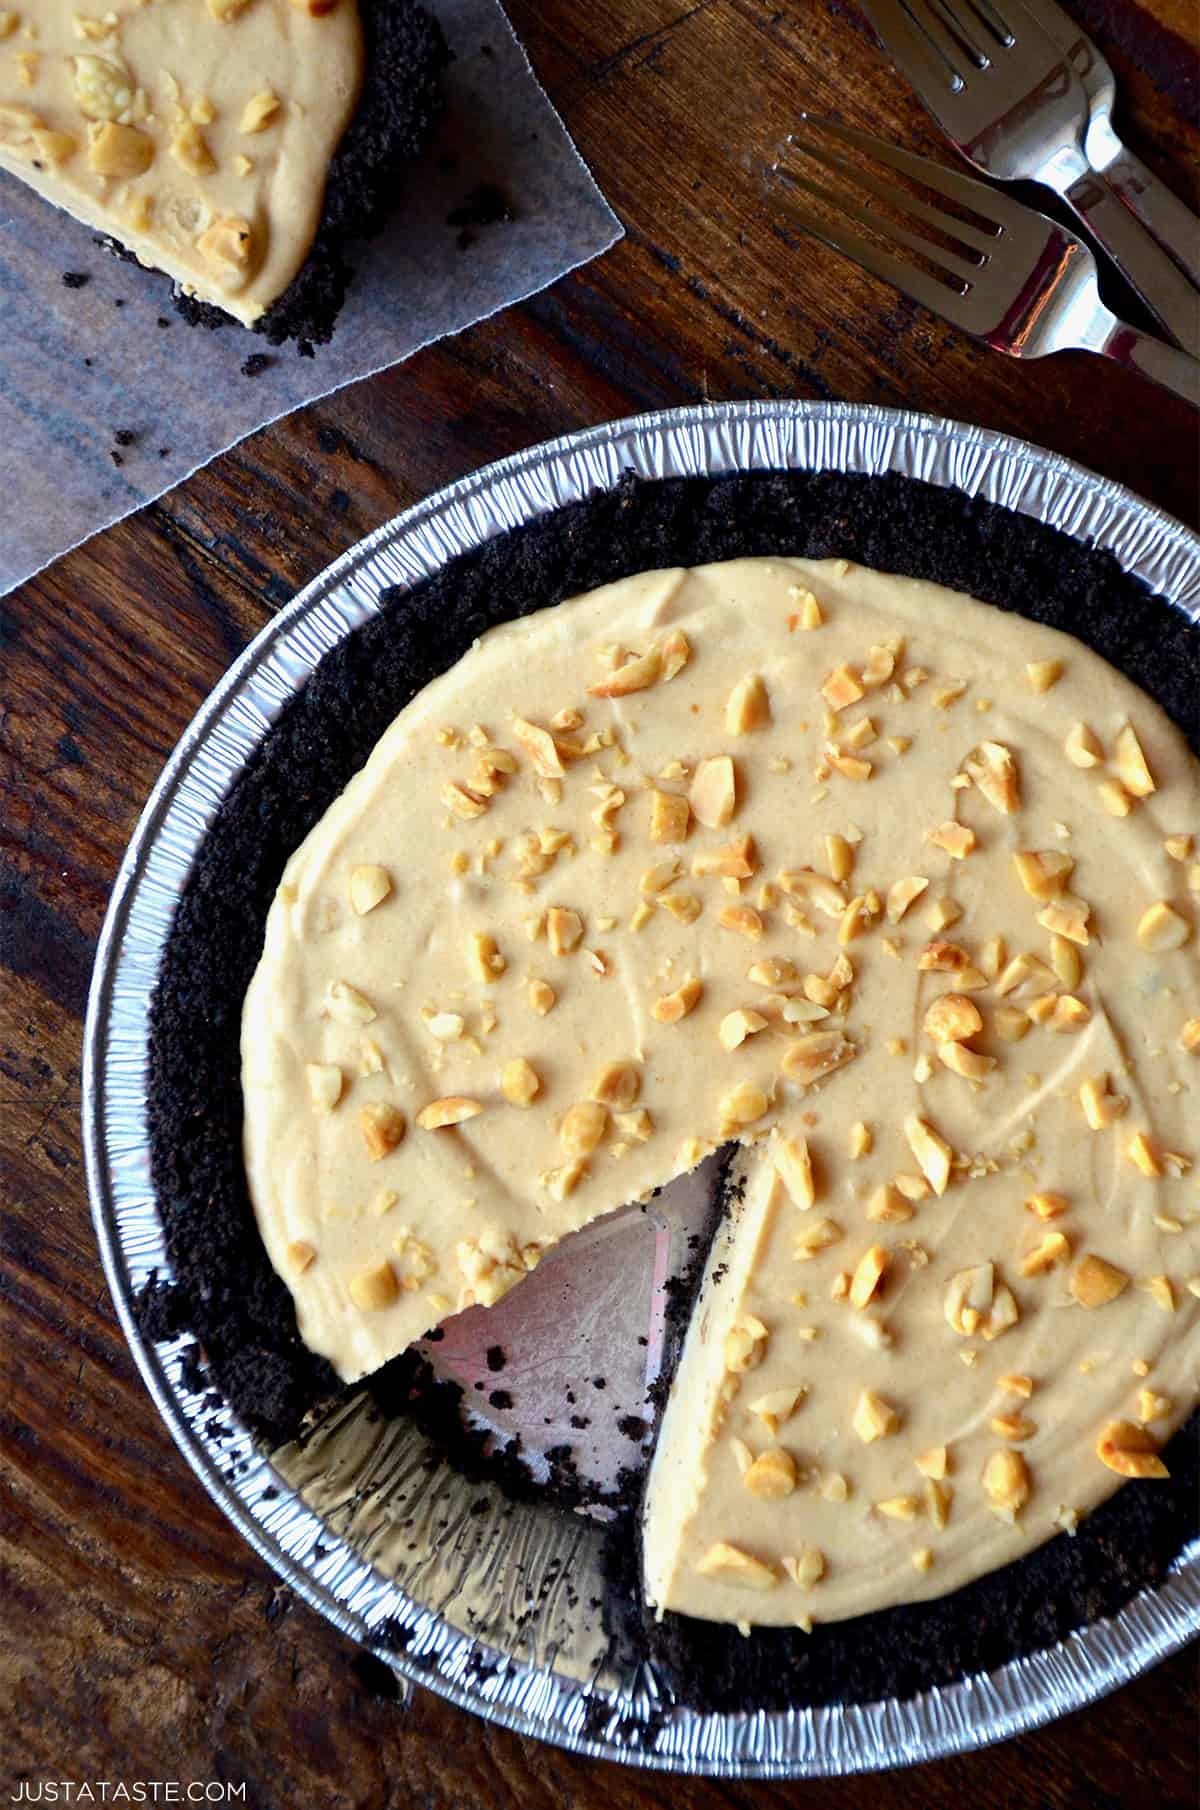 A frozen peanut butter pie topped with chopped peanuts. A slice is taken out of the pie.